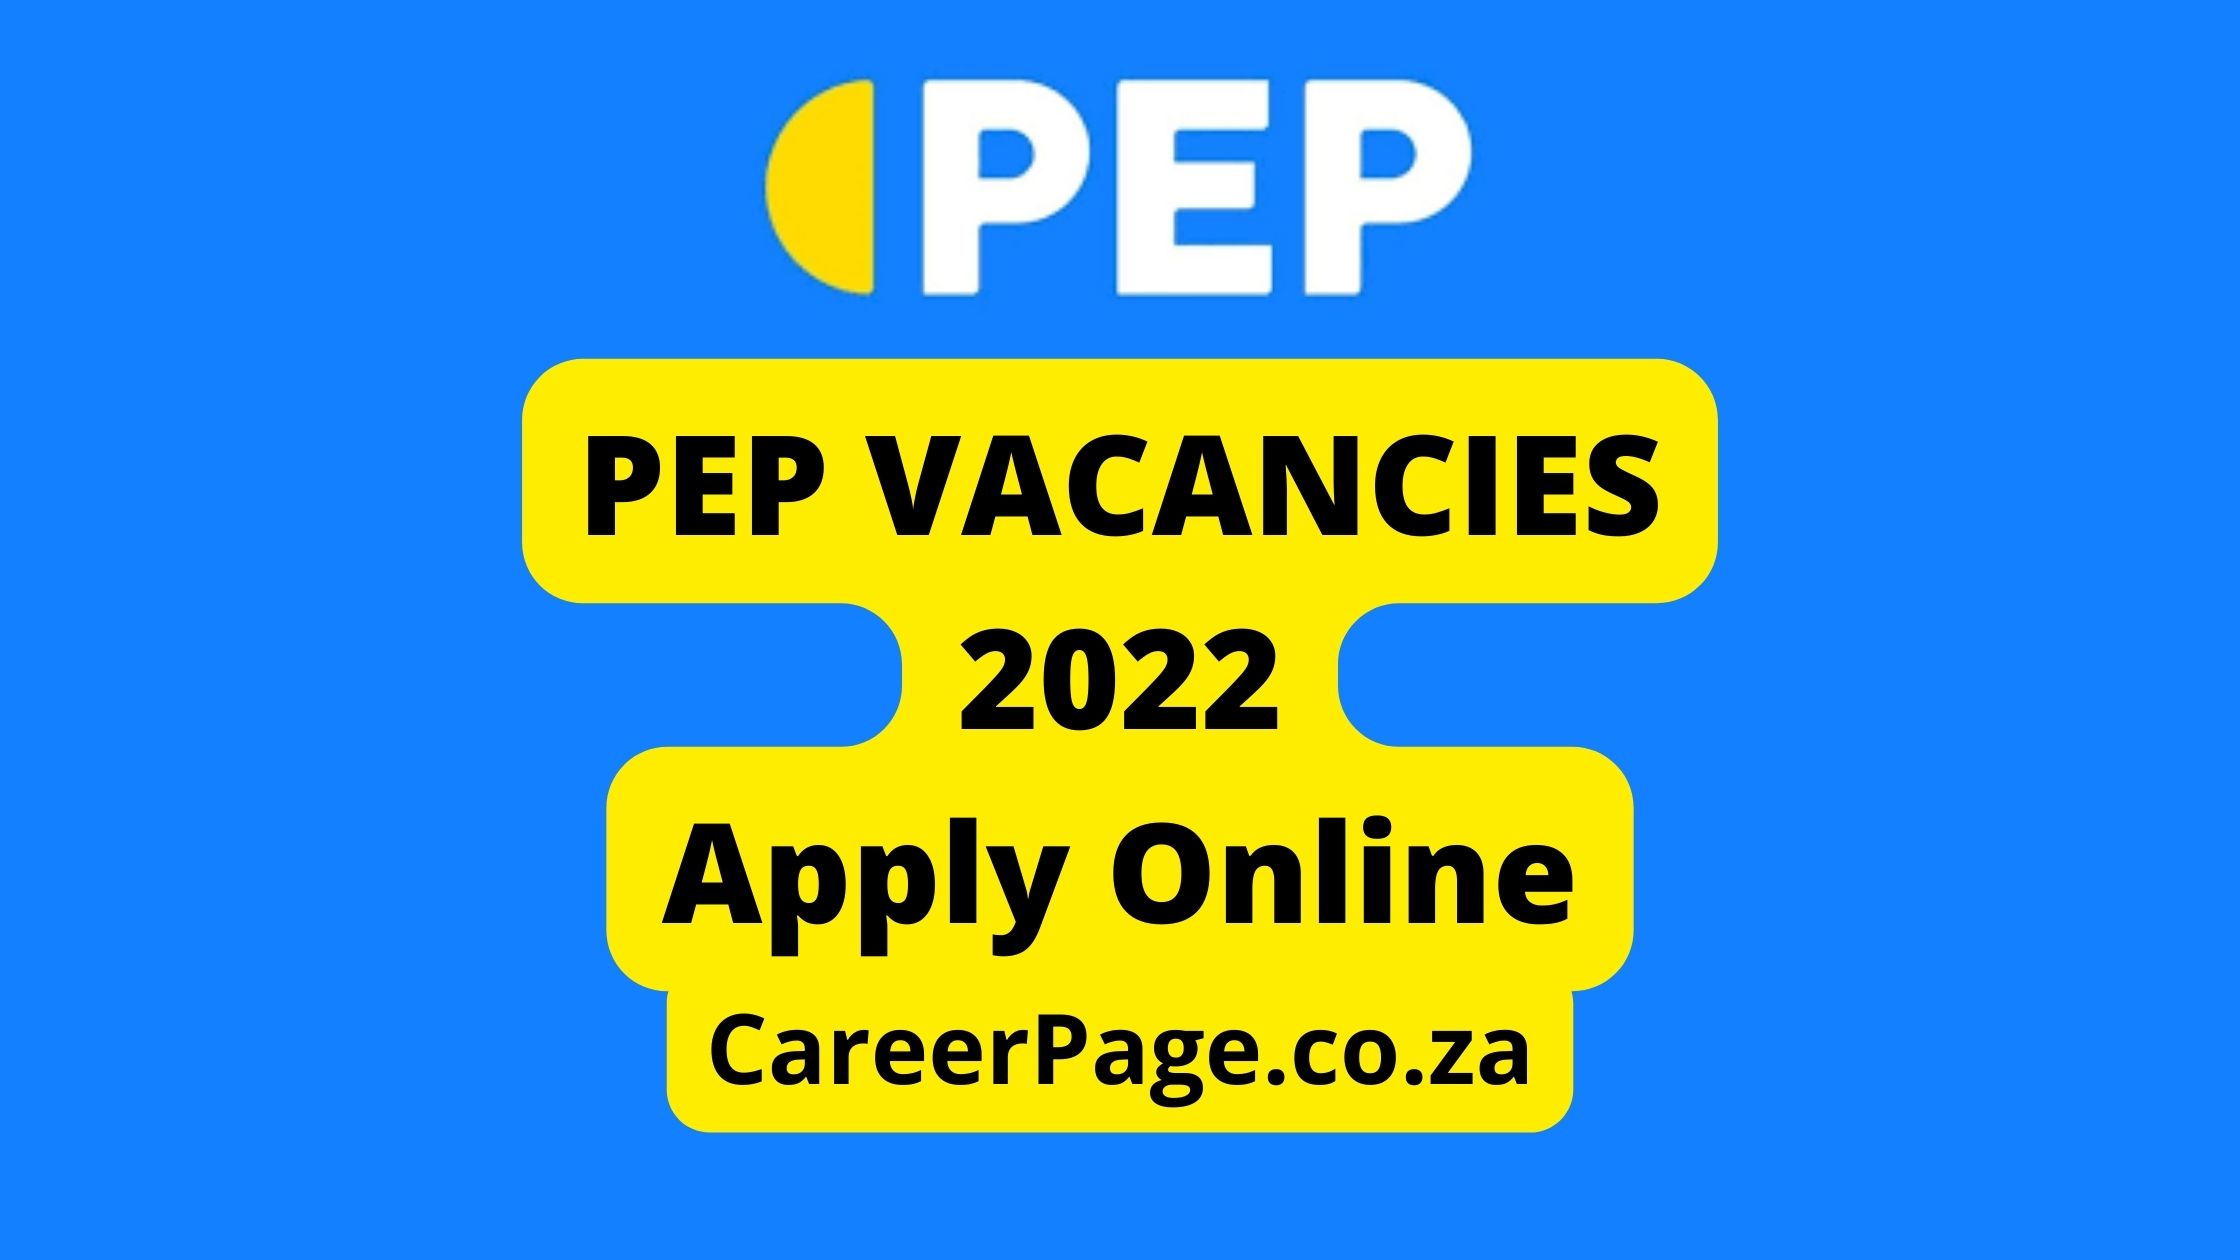 pep-vacancies-how-to-apply-for-pep-internships-careerpage-co-za